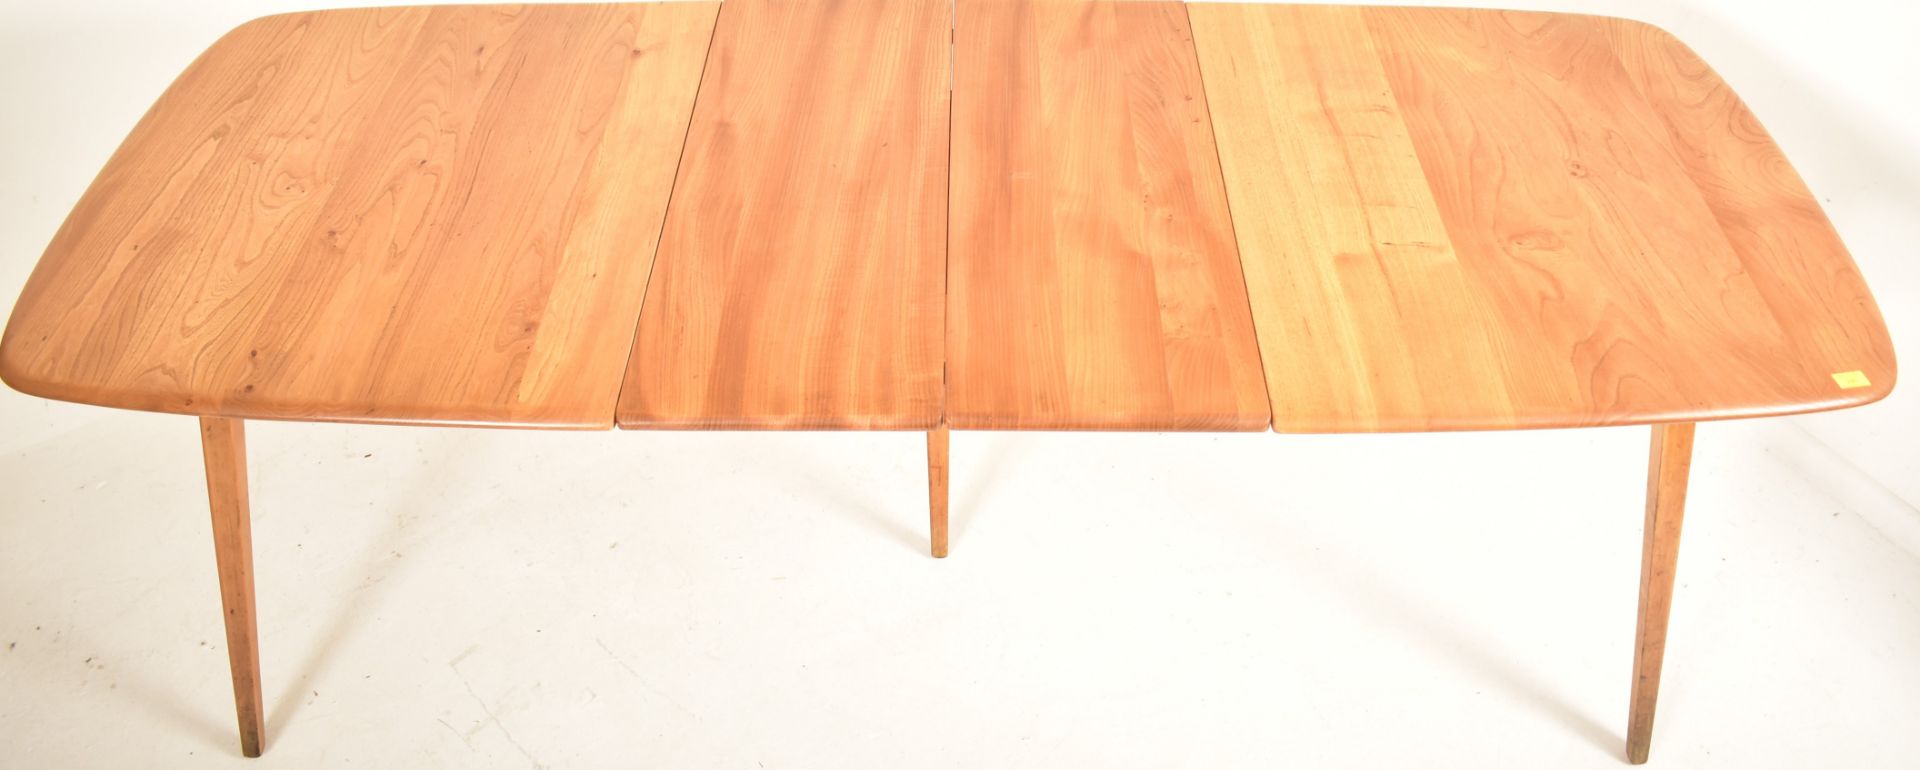 ERCOL - GRAND PLANK - MID CENTURY BEECH AND ELM TABLE - Image 2 of 6